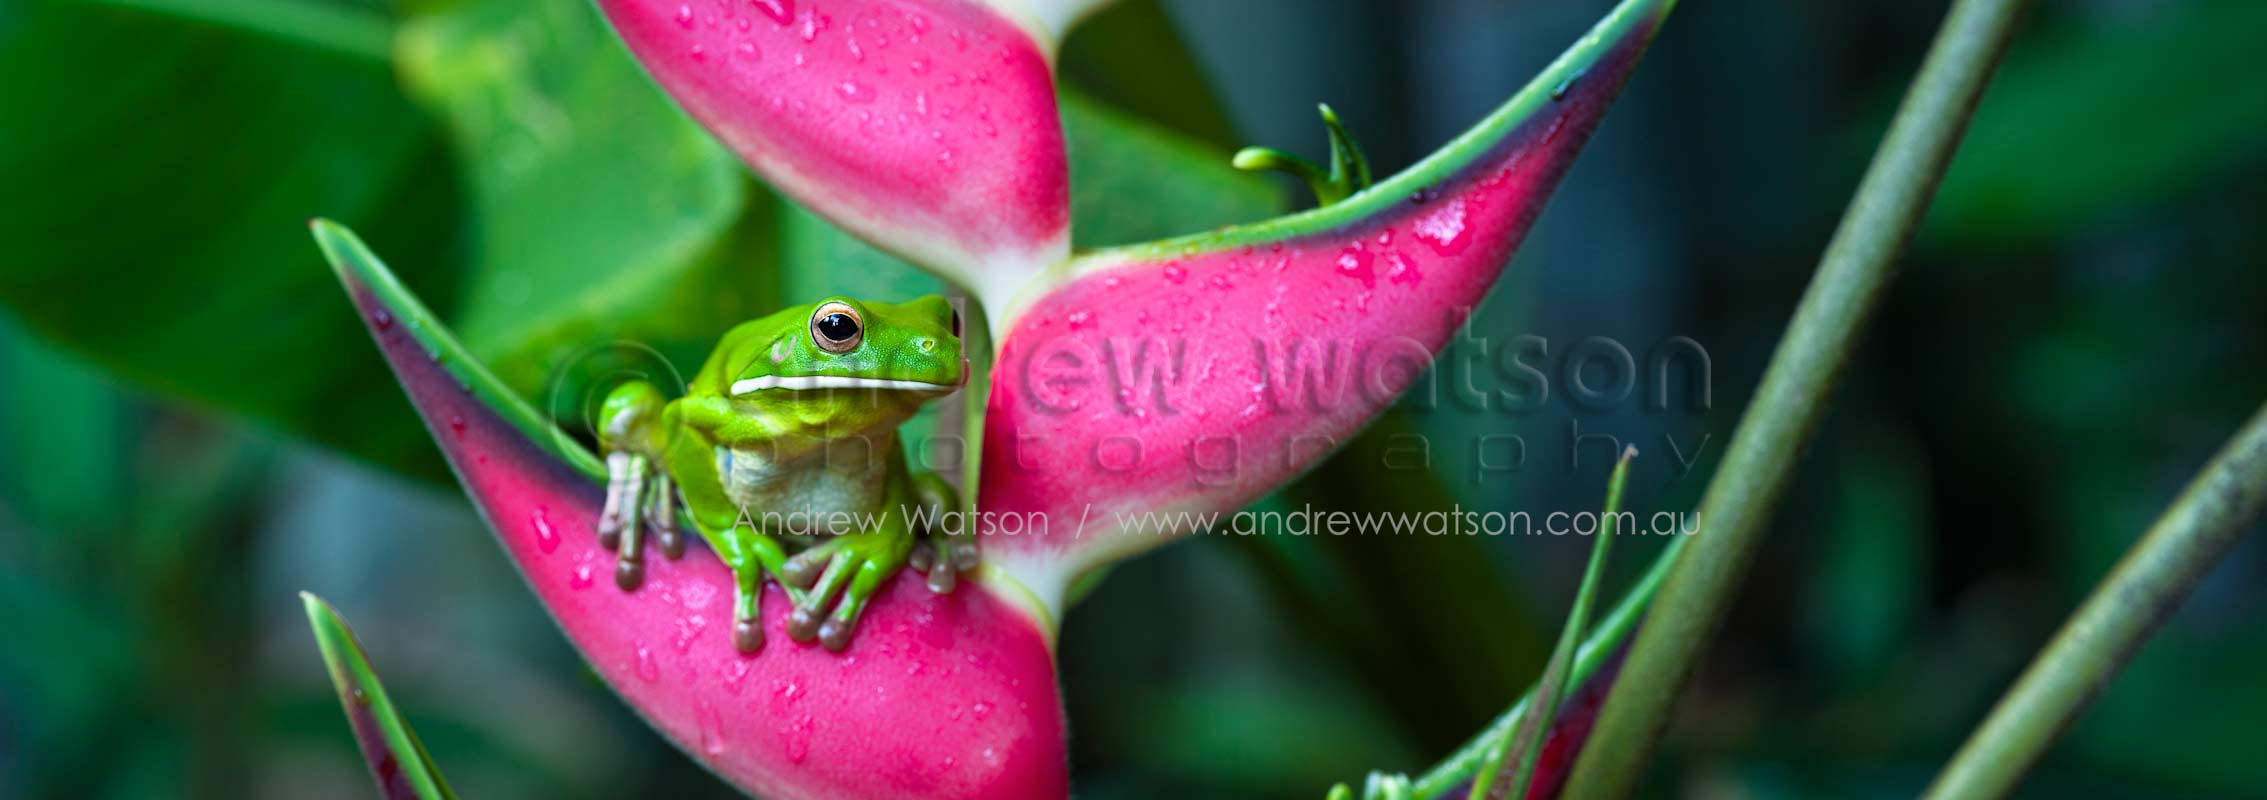 White-lipped tree frog on heliconiaCairns, North QueenslandImage available for licensing or as a fine-art print... please enquire